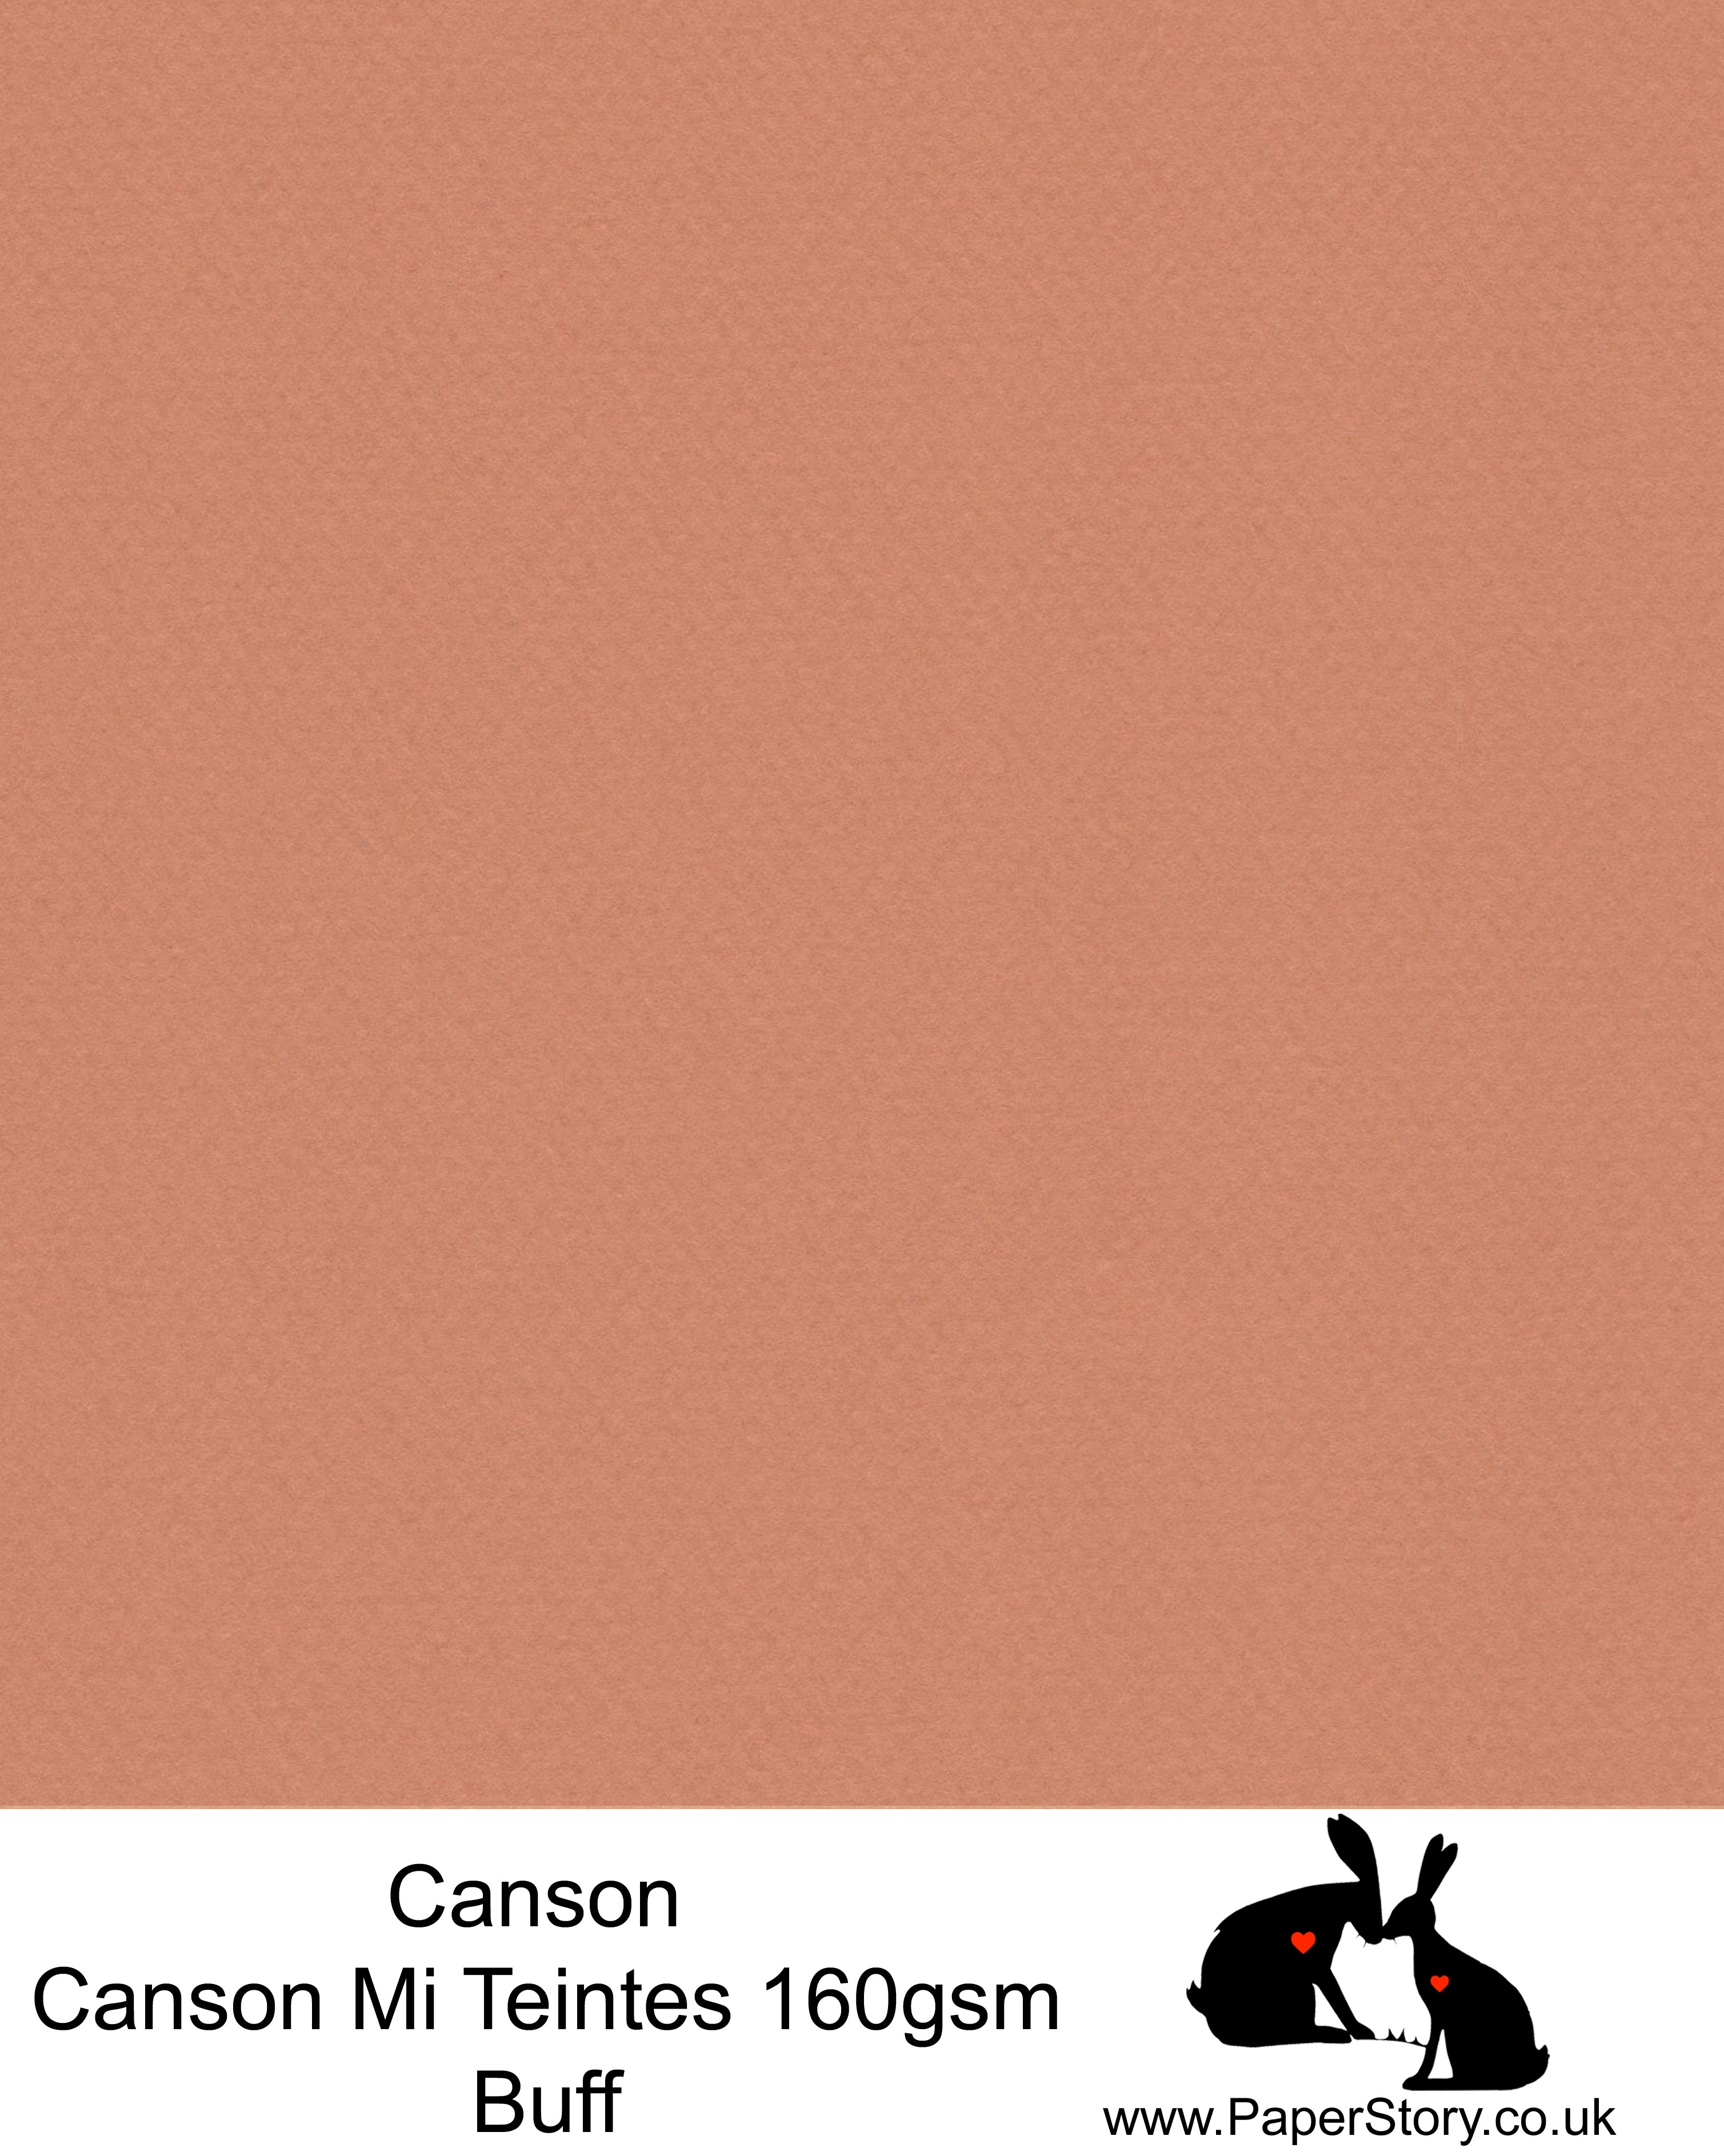 Canson Mi Teintes acid free, Buff, deep warm orange brown, hammered texture honeycomb surface paper 160 gsm. This is a popular and classic paper for all artists especially well respected for Pastel  and Papercutting made famous by Paper Panda. This paper has a honeycombed finish one side and fine grain the other. An authentic art paper, acid free with a  very high 50% cotton content. Canson Mi-Teintes complies with the ISO 9706 standard on permanence, a guarantee of excellent conservation  